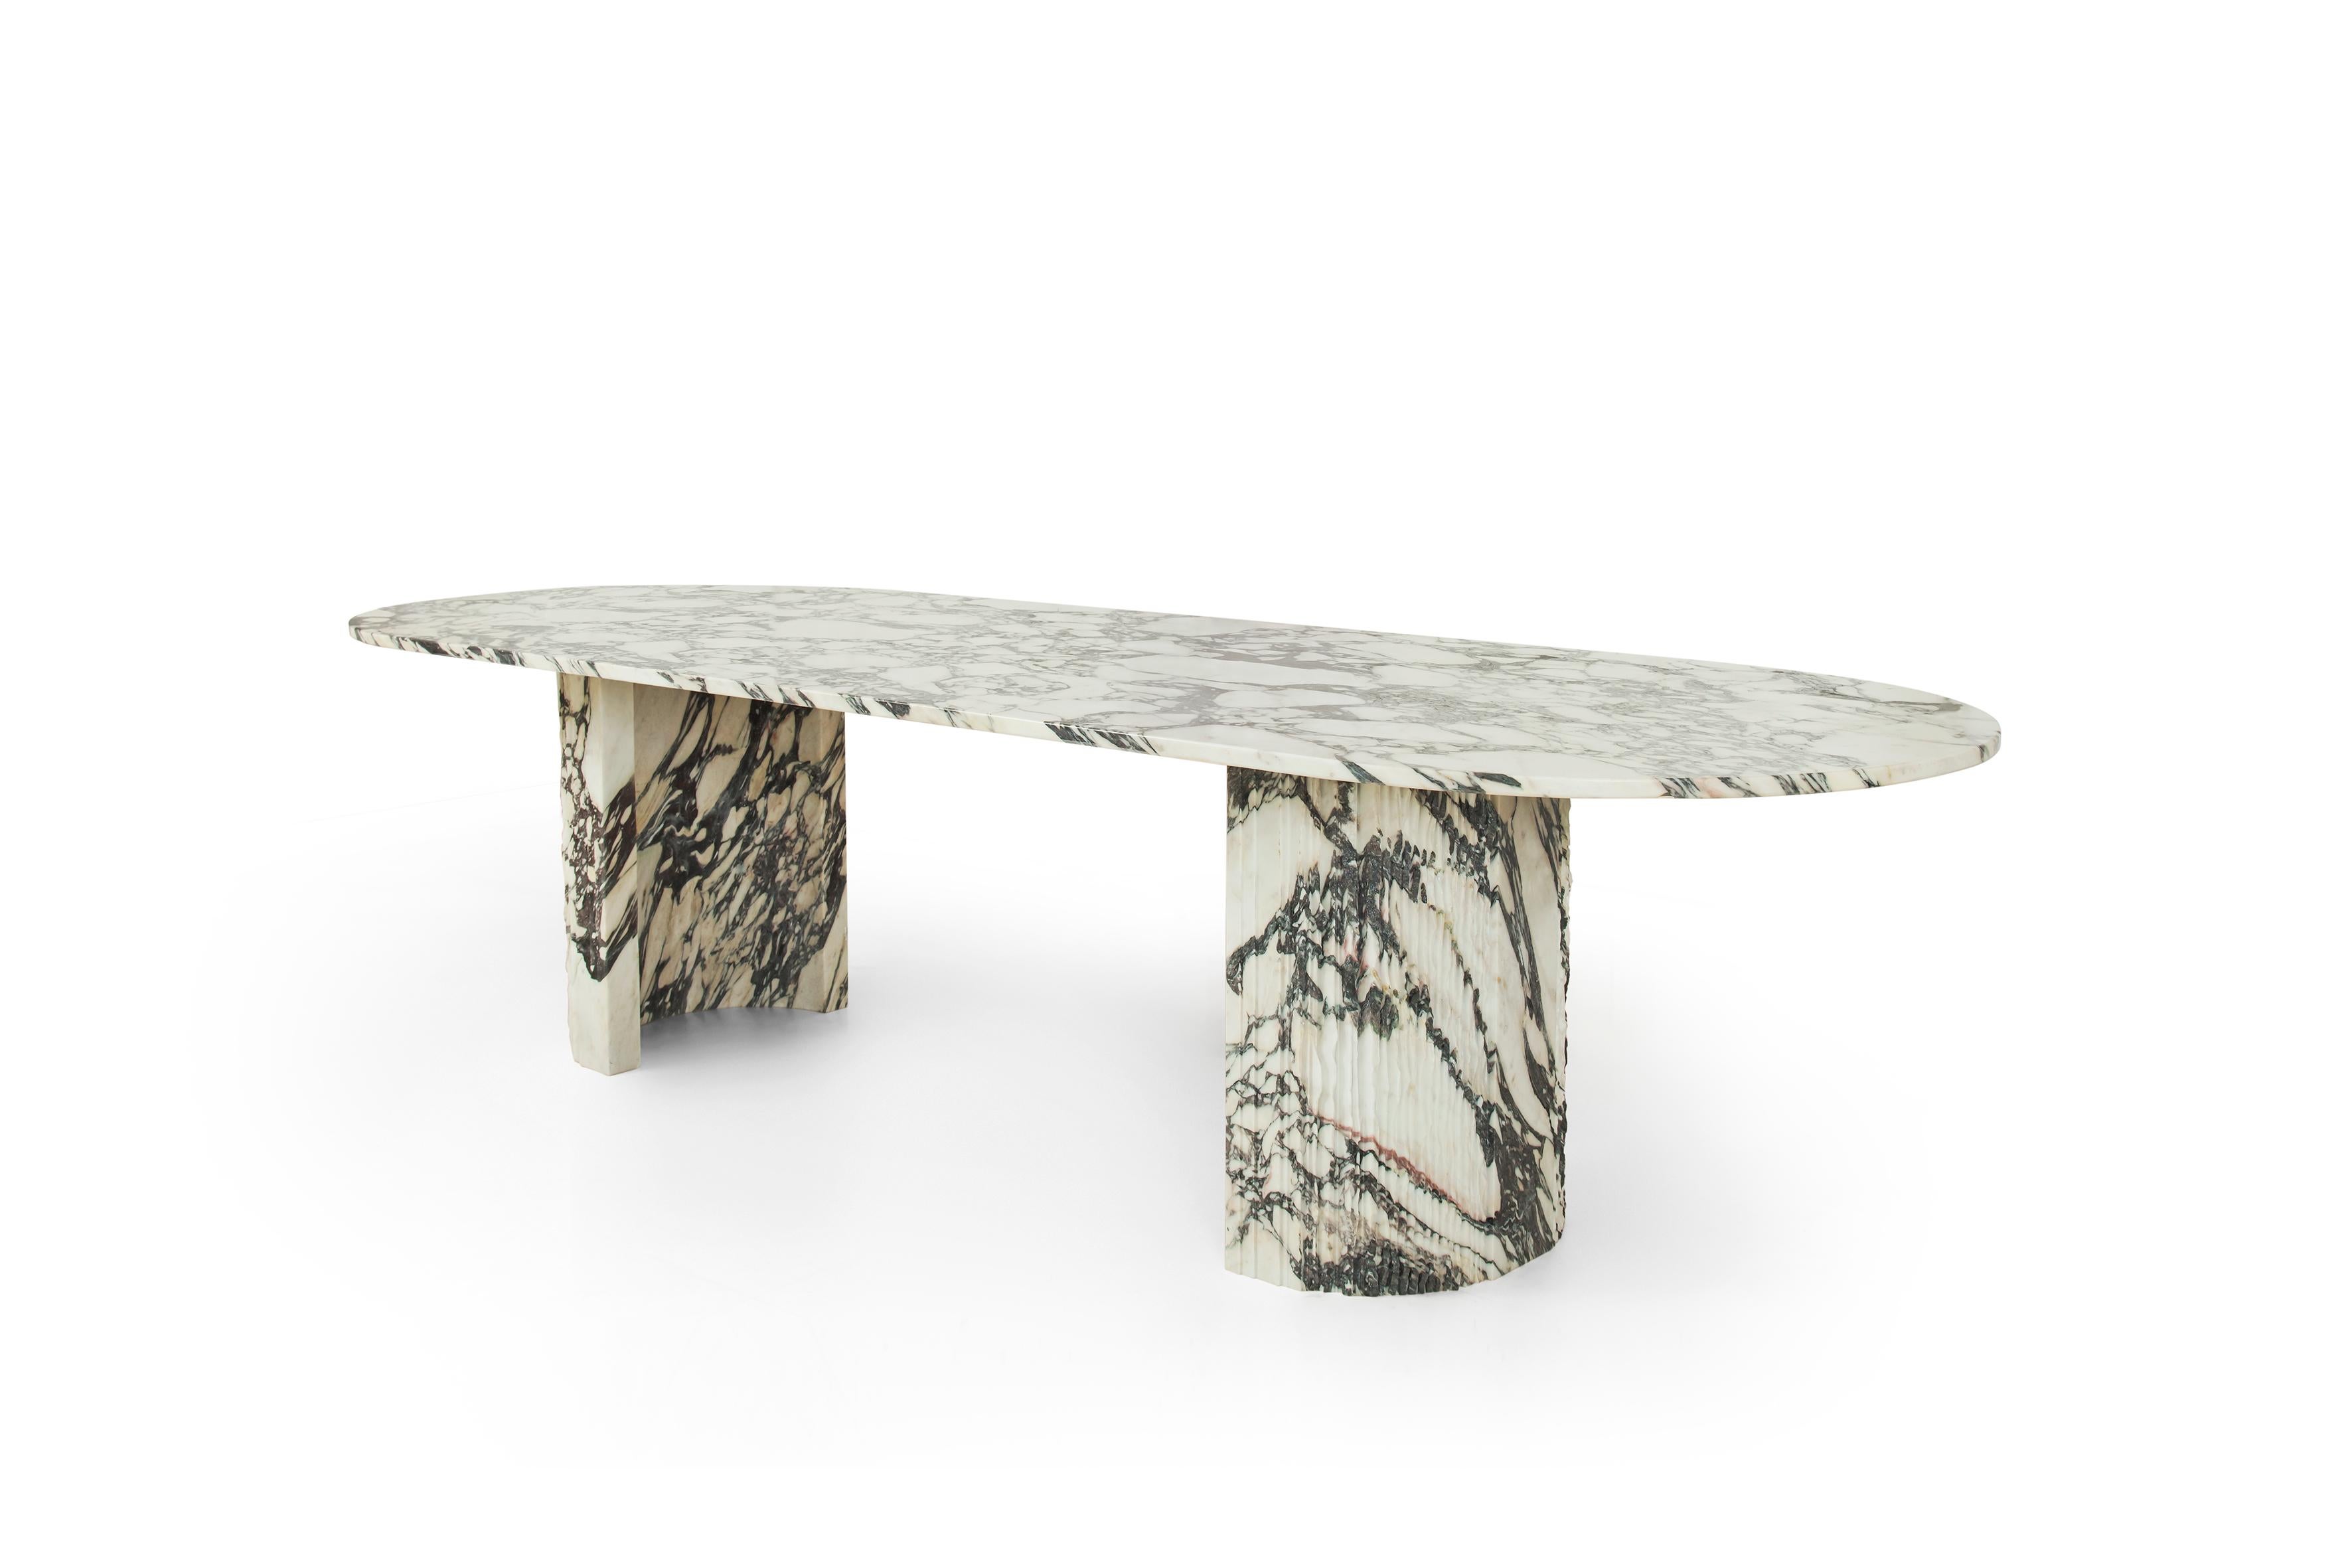 Egyptian Sculpted Brescia Marble Table by Omar Chakil - Private listing for L.